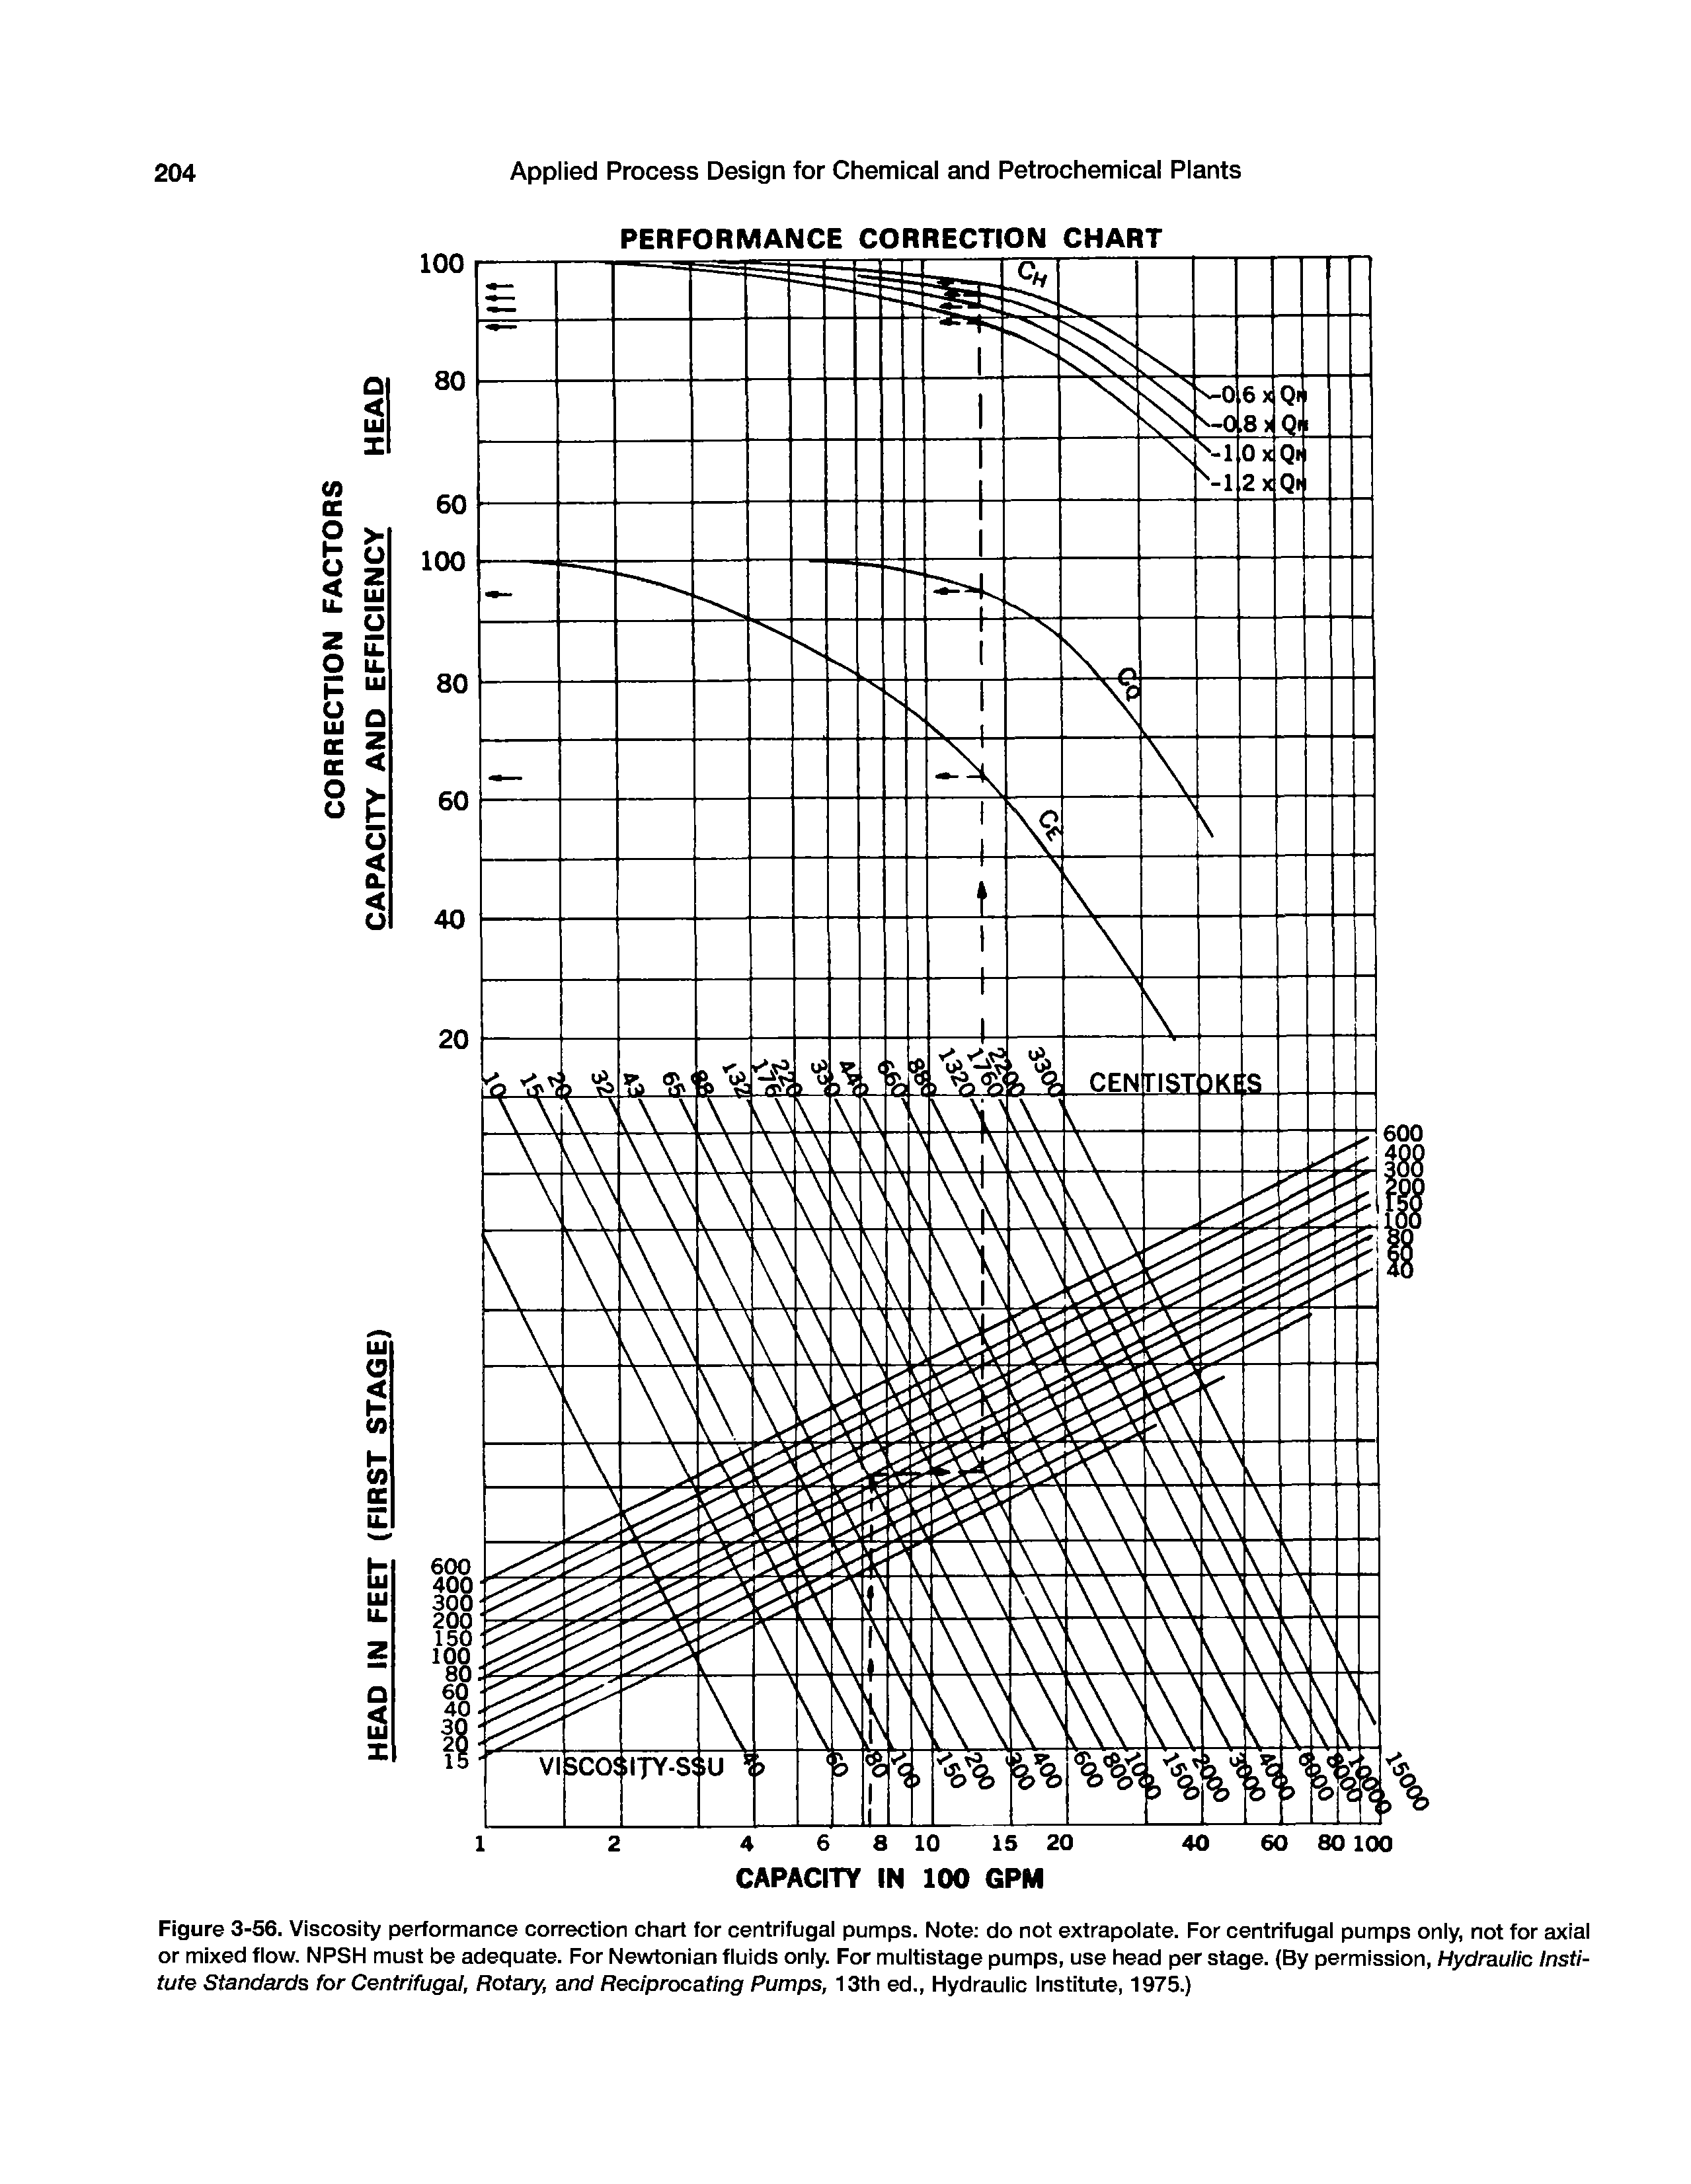 Figure 3-56. Viscosity performance correction chart for centrifugal pumps. Note do not extrapolate. For centrifugal pumps only, not for axial or mixed flow. NPSH must be adequate. For Newtonian fluids only. For multistage pumps, use head per stage. (By permission. Hydraulic Institute Standards for Centrifugal, Rotary, and Reciprocating Pumps, 13th ed.. Hydraulic Institute, 1975.)...